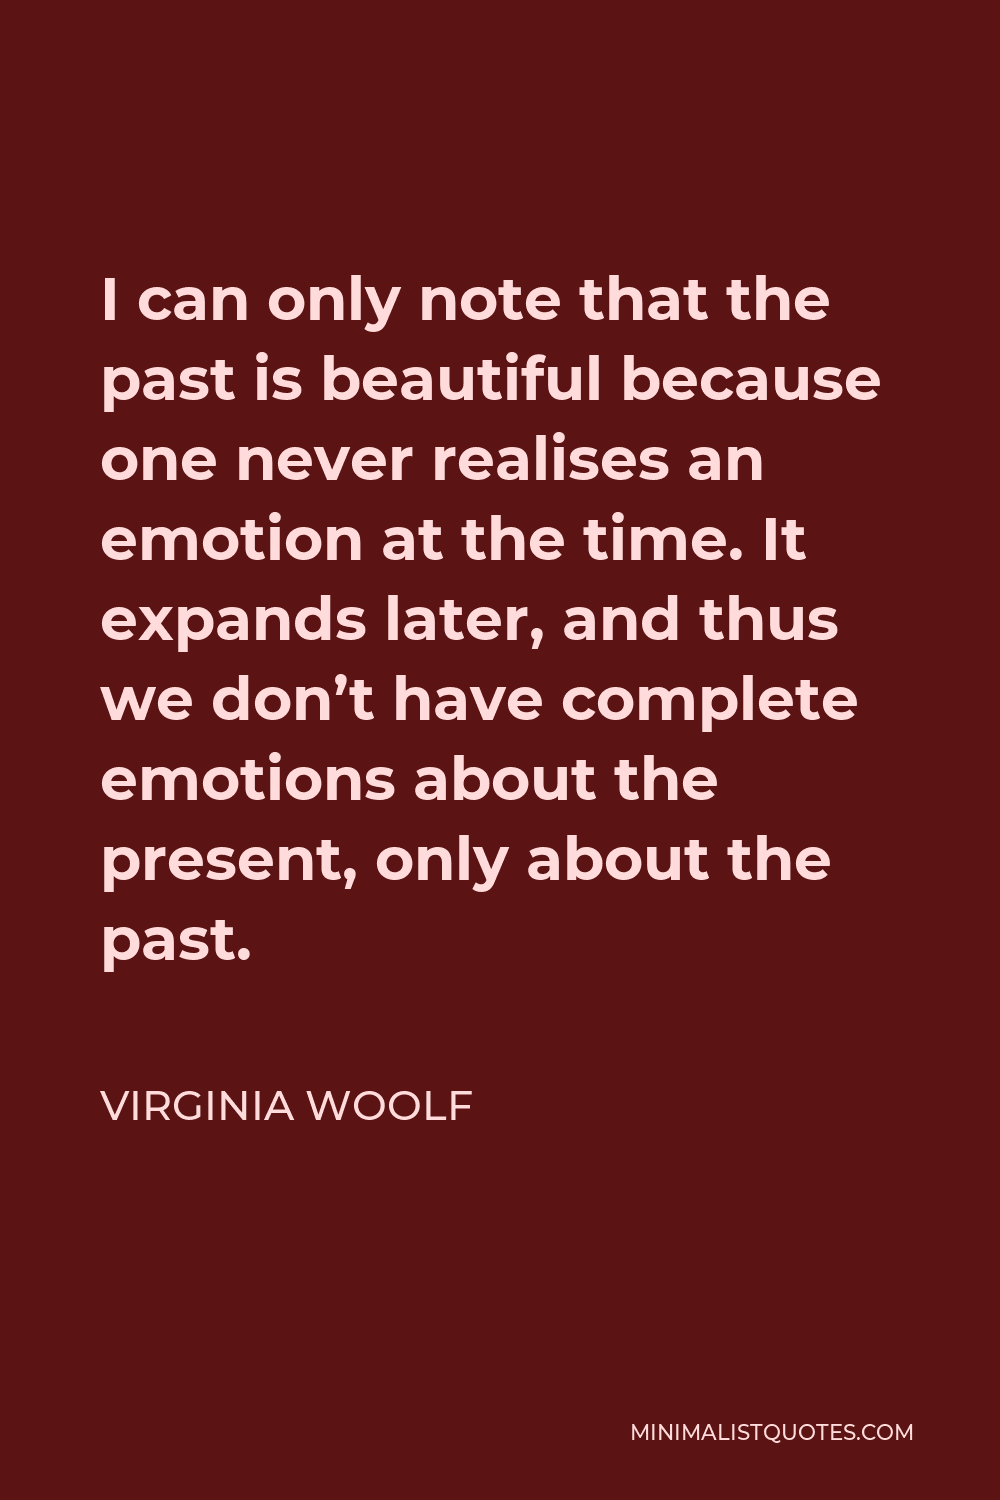 Virginia Woolf Quote - I can only note that the past is beautiful because one never realises an emotion at the time. It expands later, and thus we don’t have complete emotions about the present, only about the past.